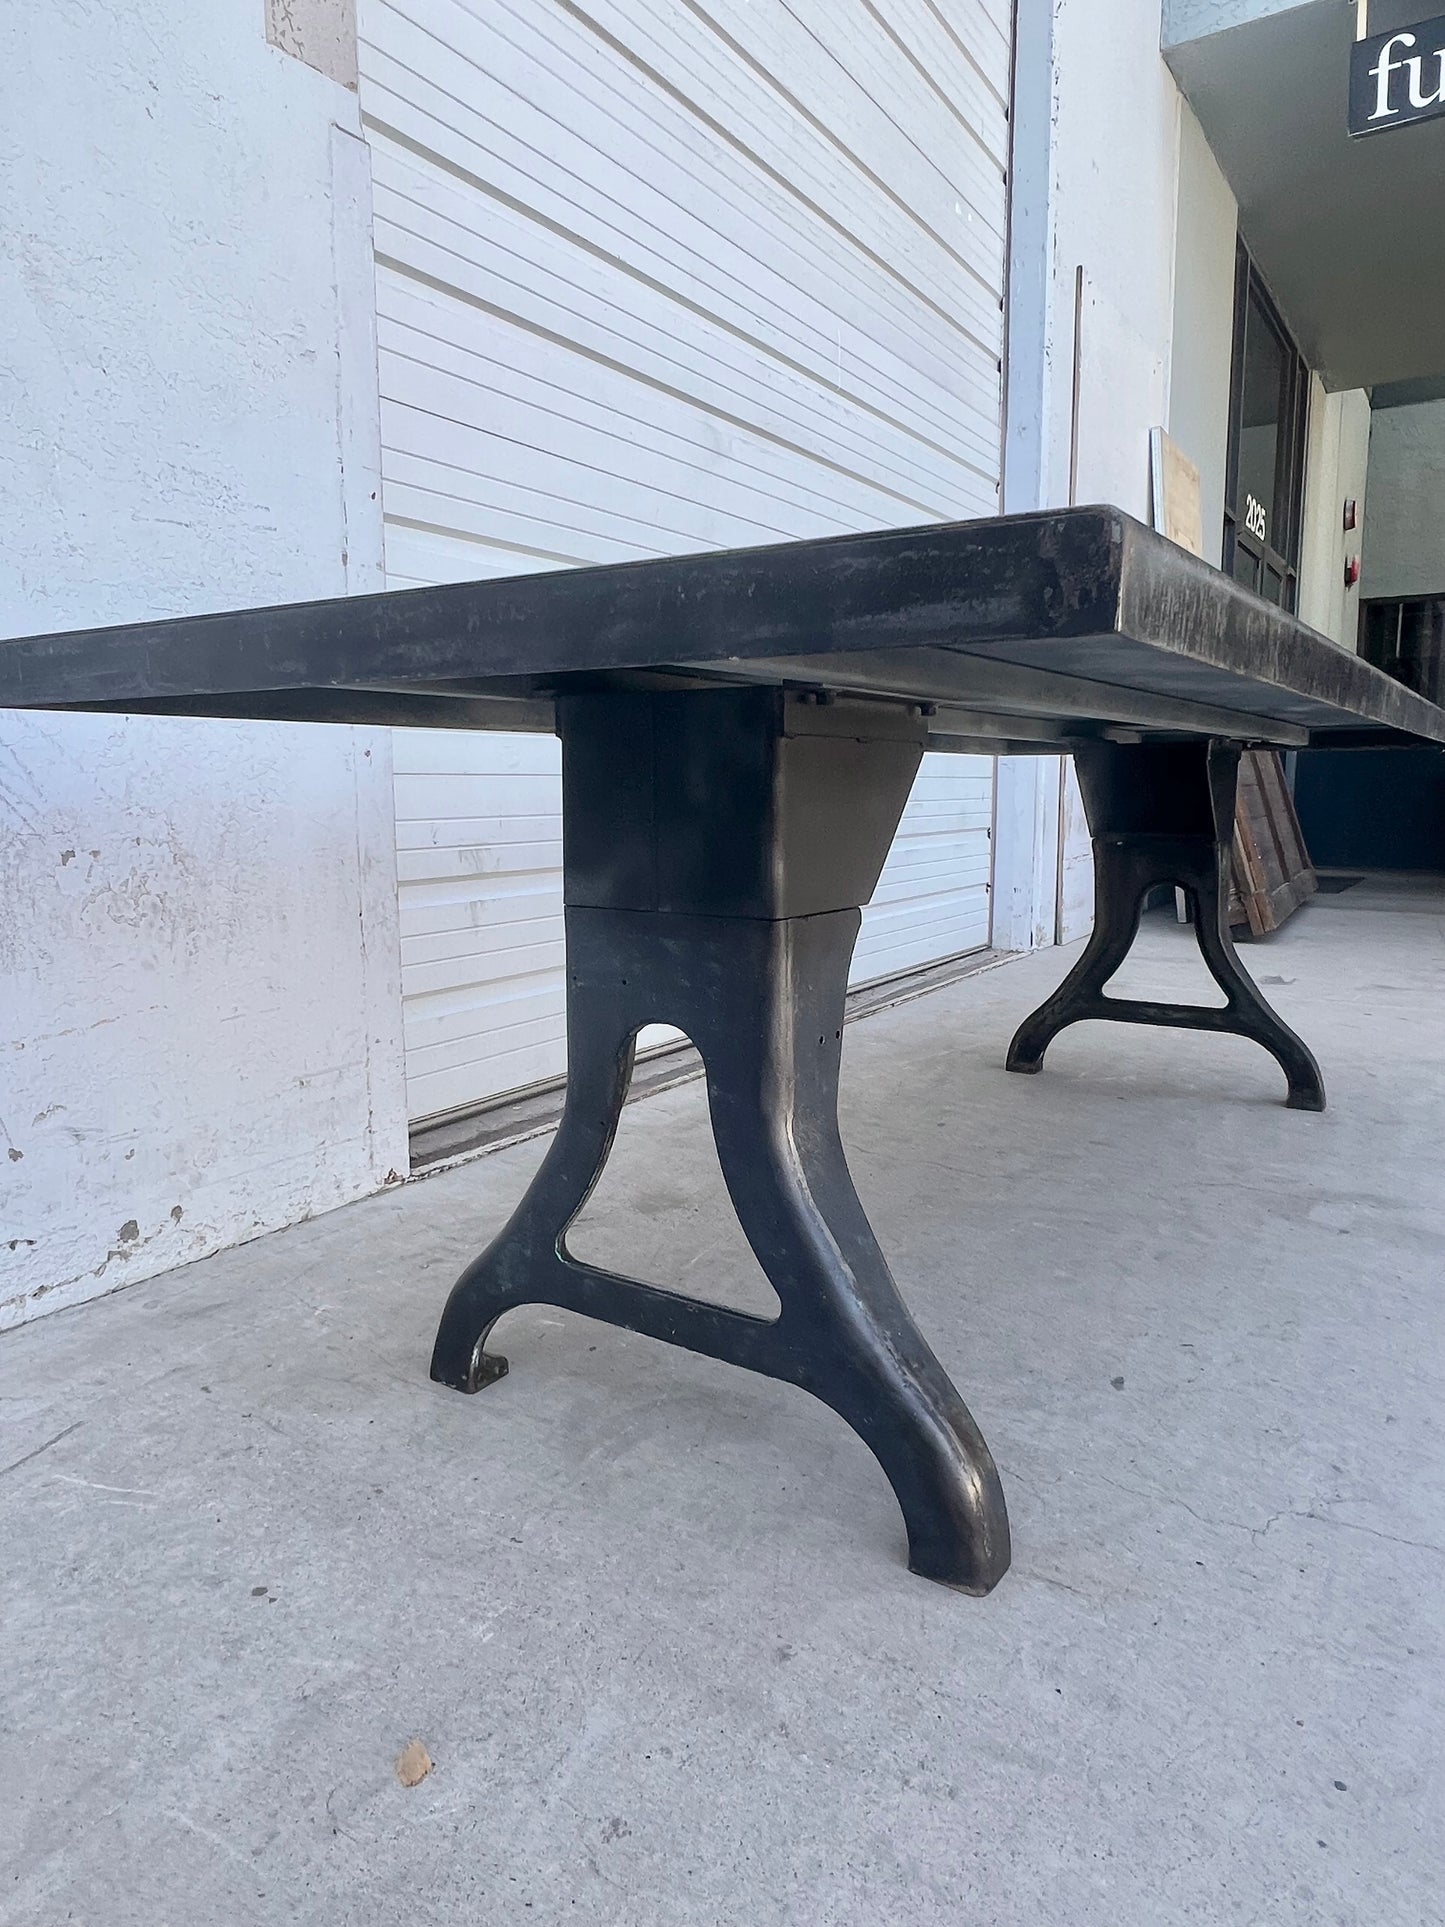 8 Ft Steel Table with Cast Iron Machine Legs